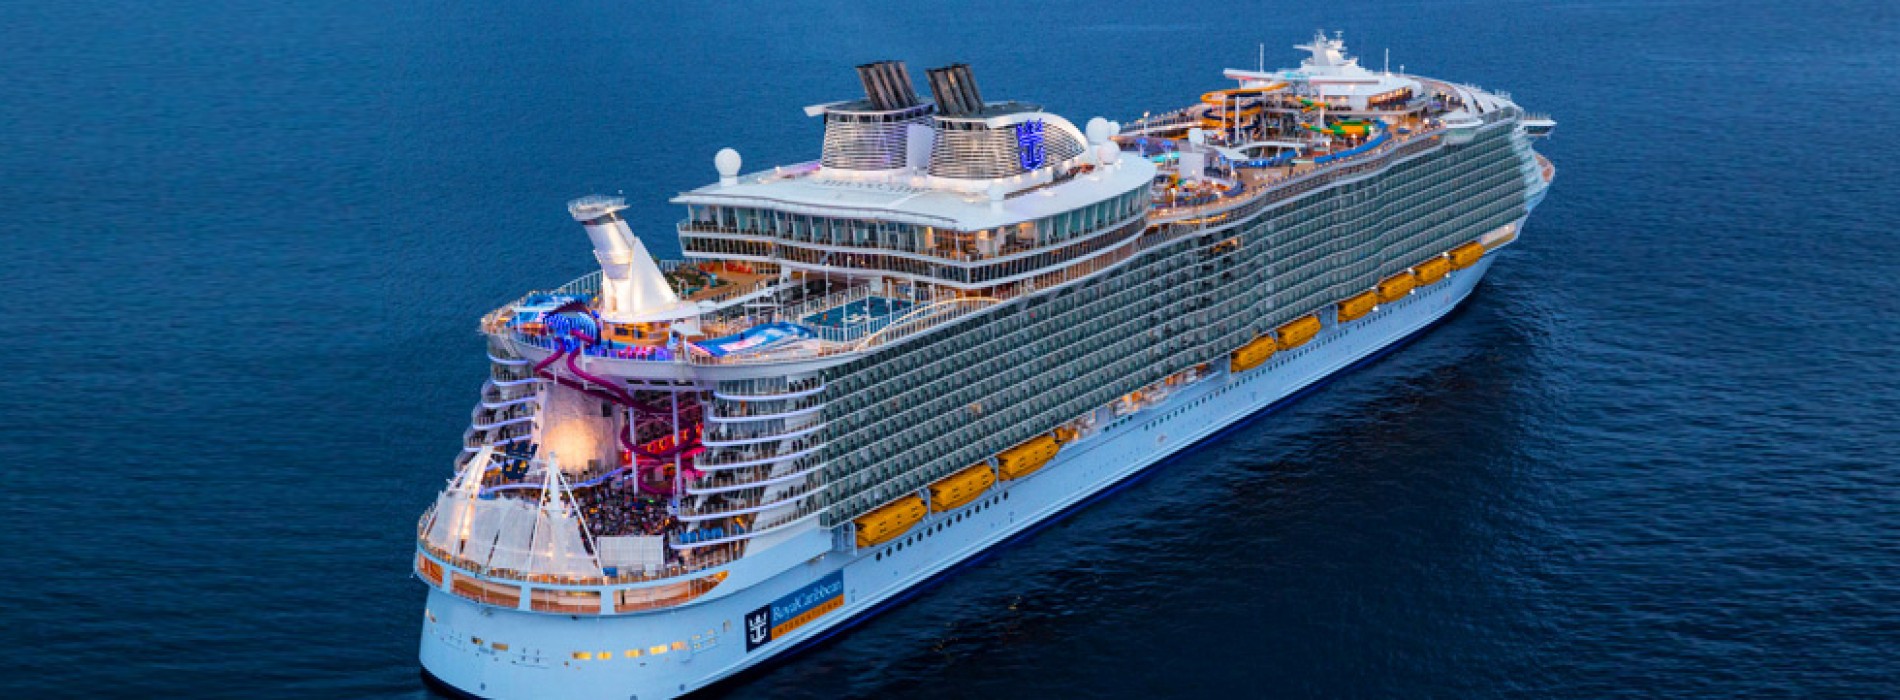 The World’s largest cruise ship, ‘Symphony of the Seas’